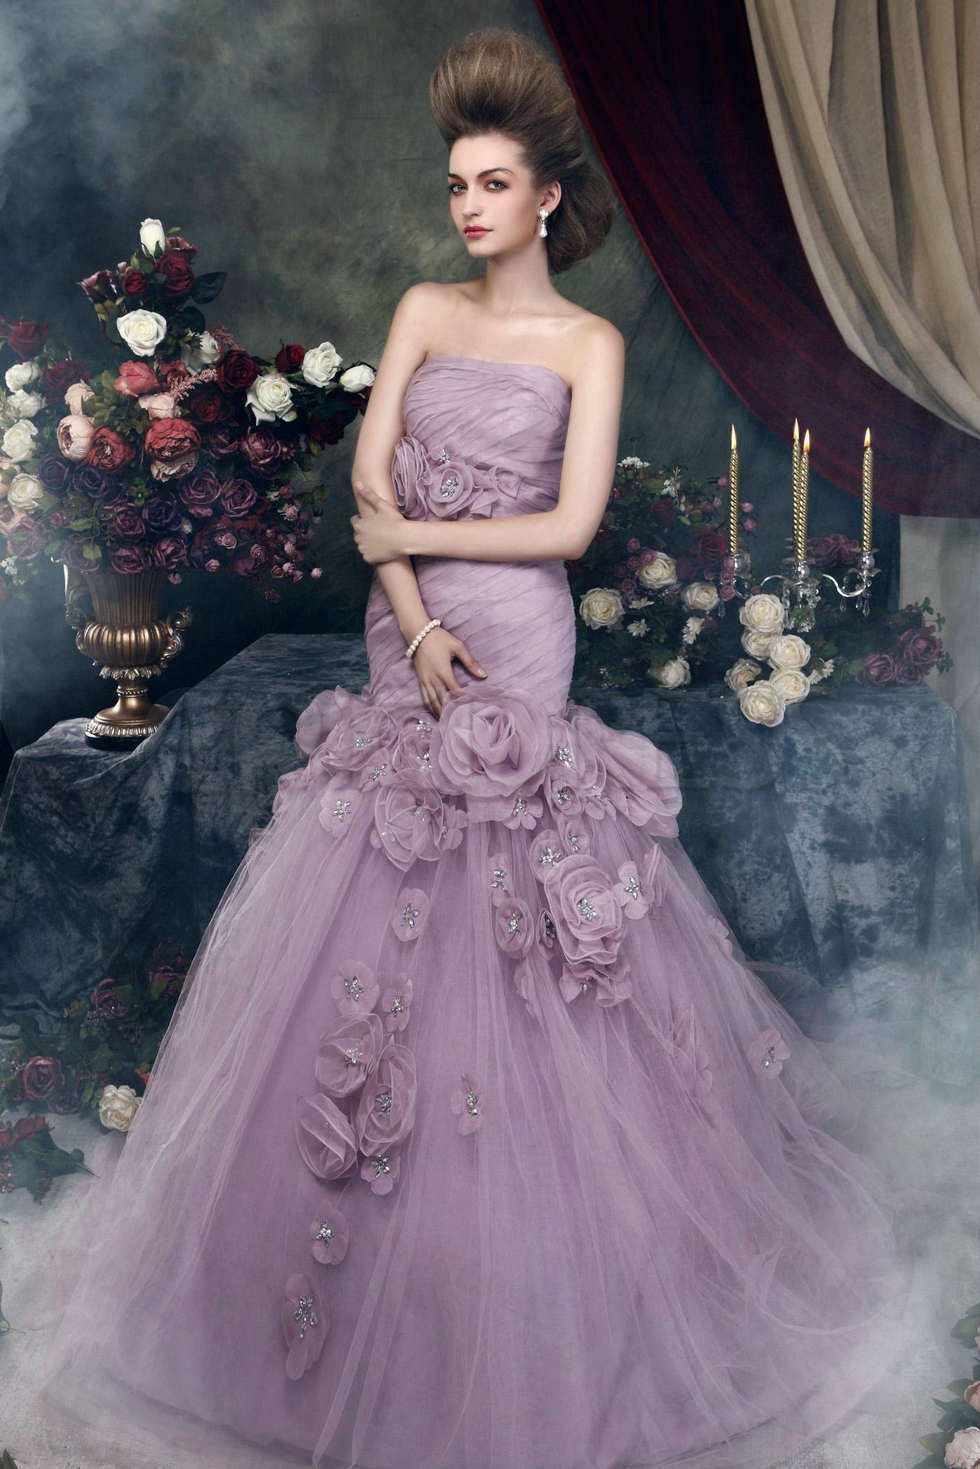 Purple Wedding Gown
 So Charming on a Purple Wedding Gown